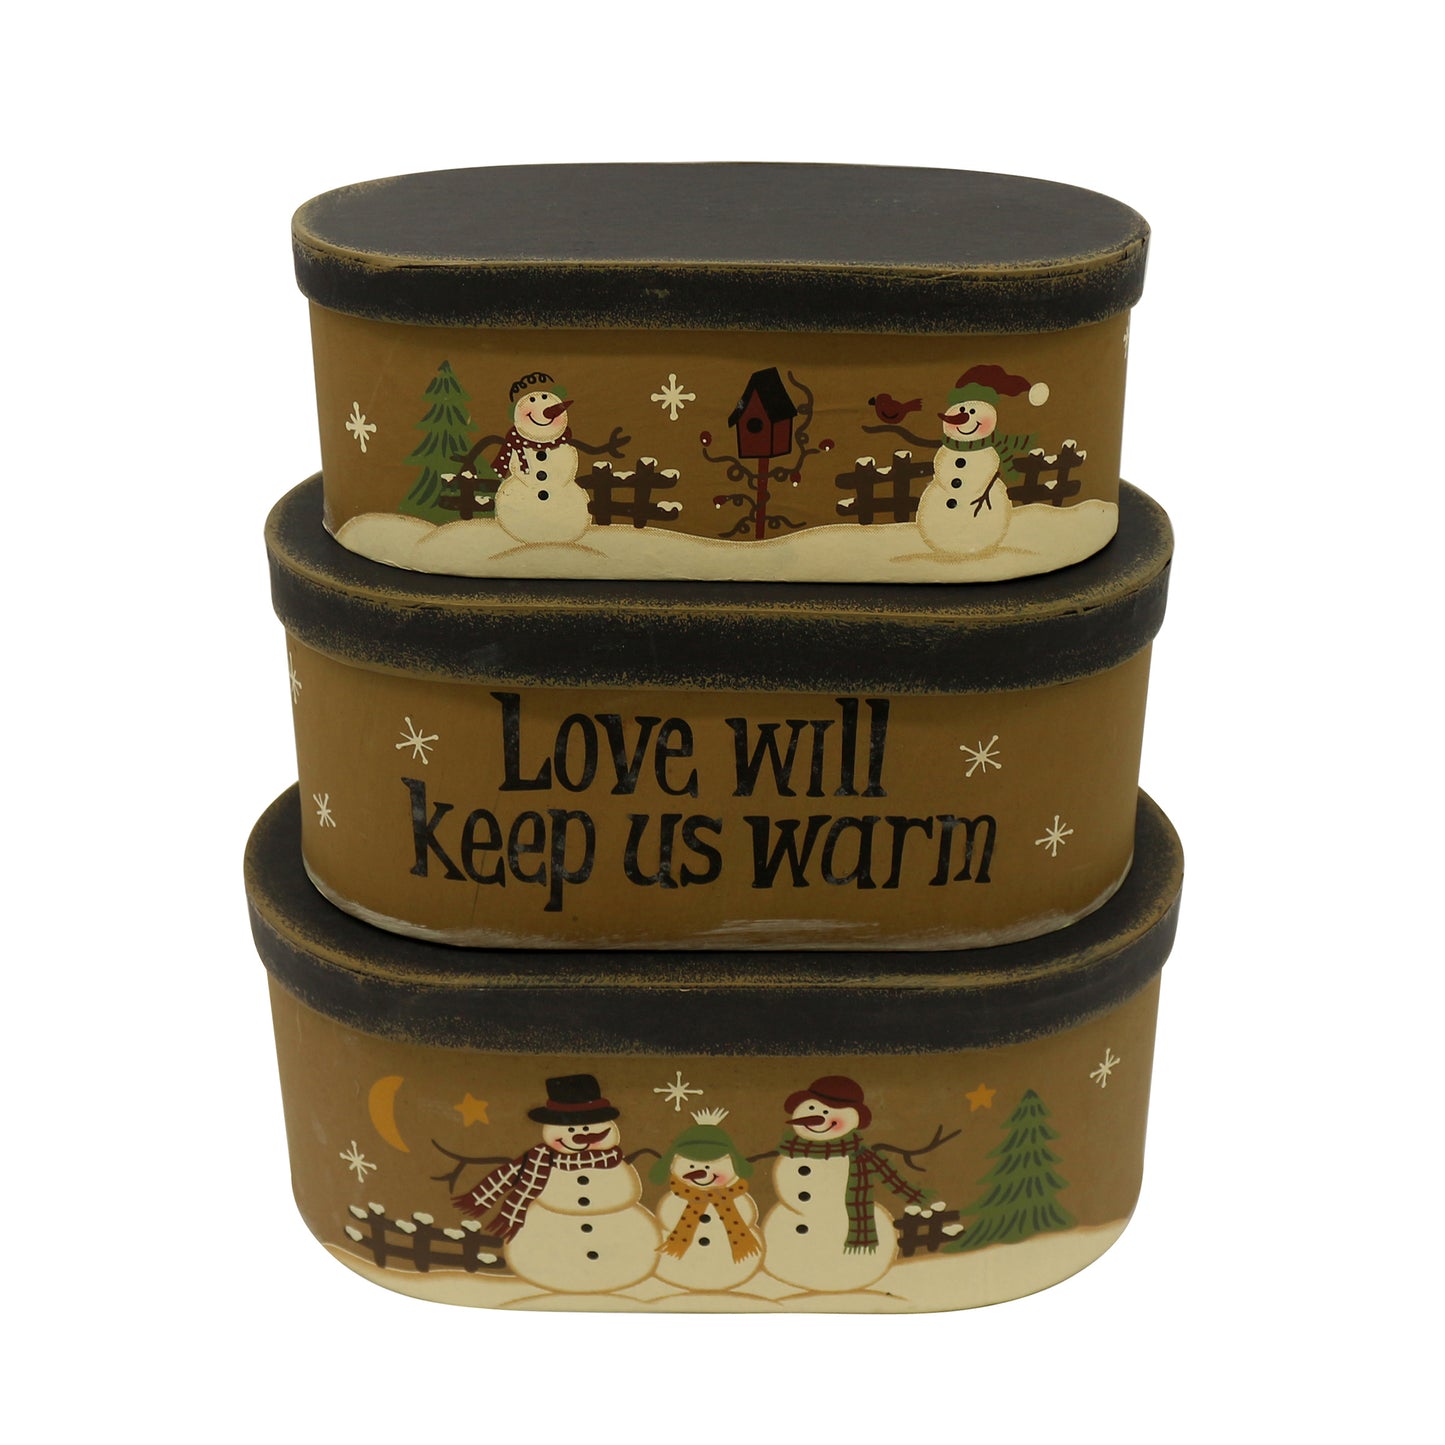 CVHOMEDECO. Oval Rustic Vintage “Love Will Keep Us Warm” Collectibles Cardboard Nesting Boxes, Large 9.75 x 5.5 x 4 Inch, Set of 3.